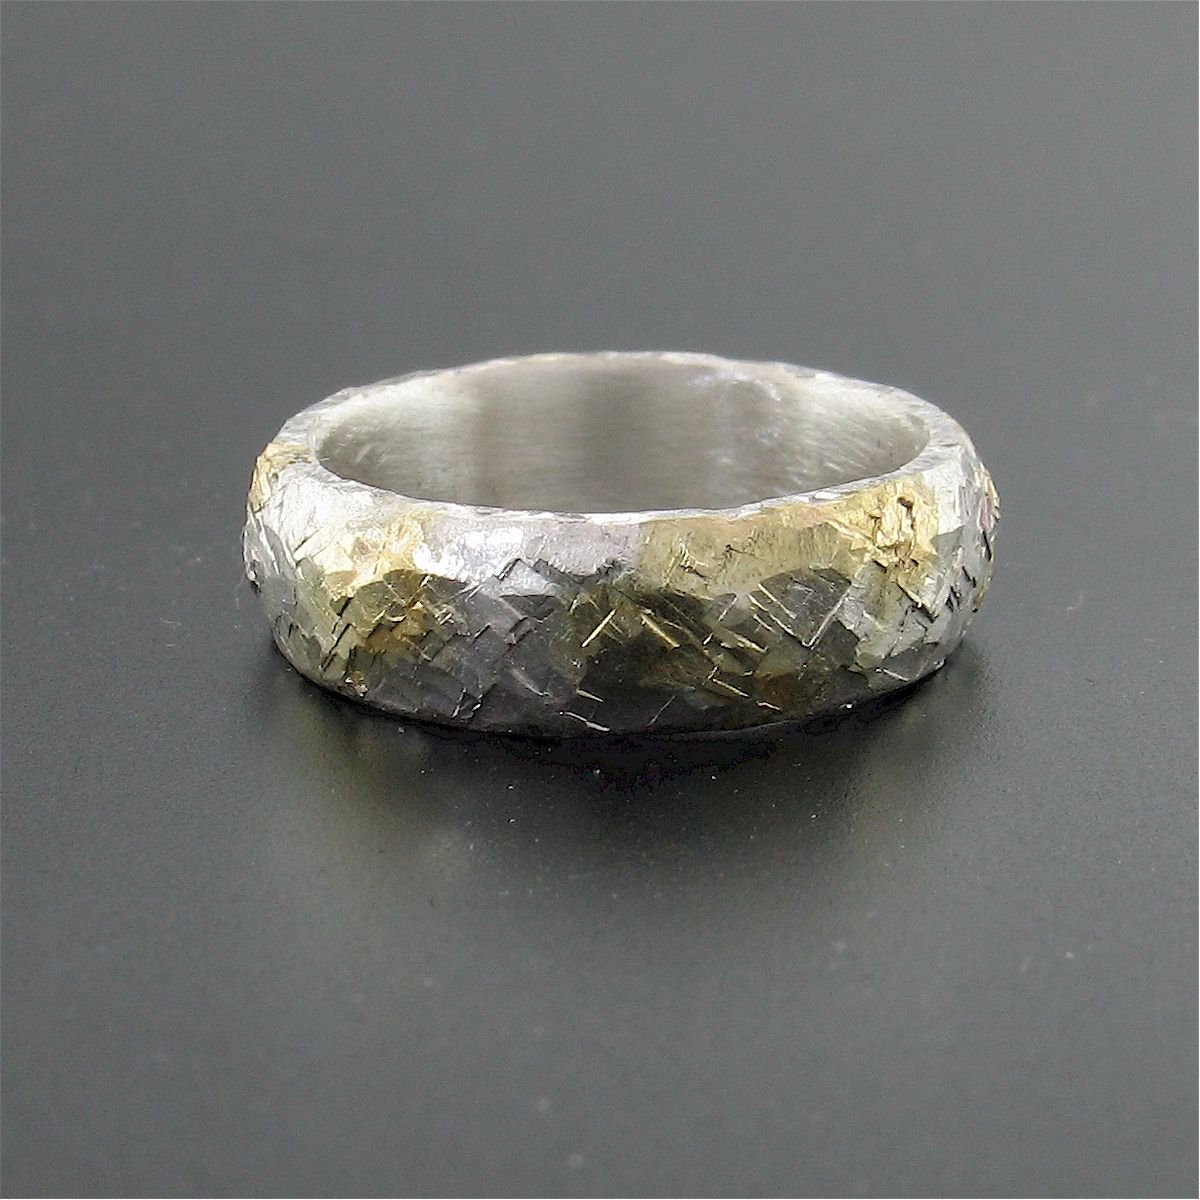 Silver Morning View court wedding ring with rustic hammered surface. Original design 5mm handmade band - Cumbrian Designs